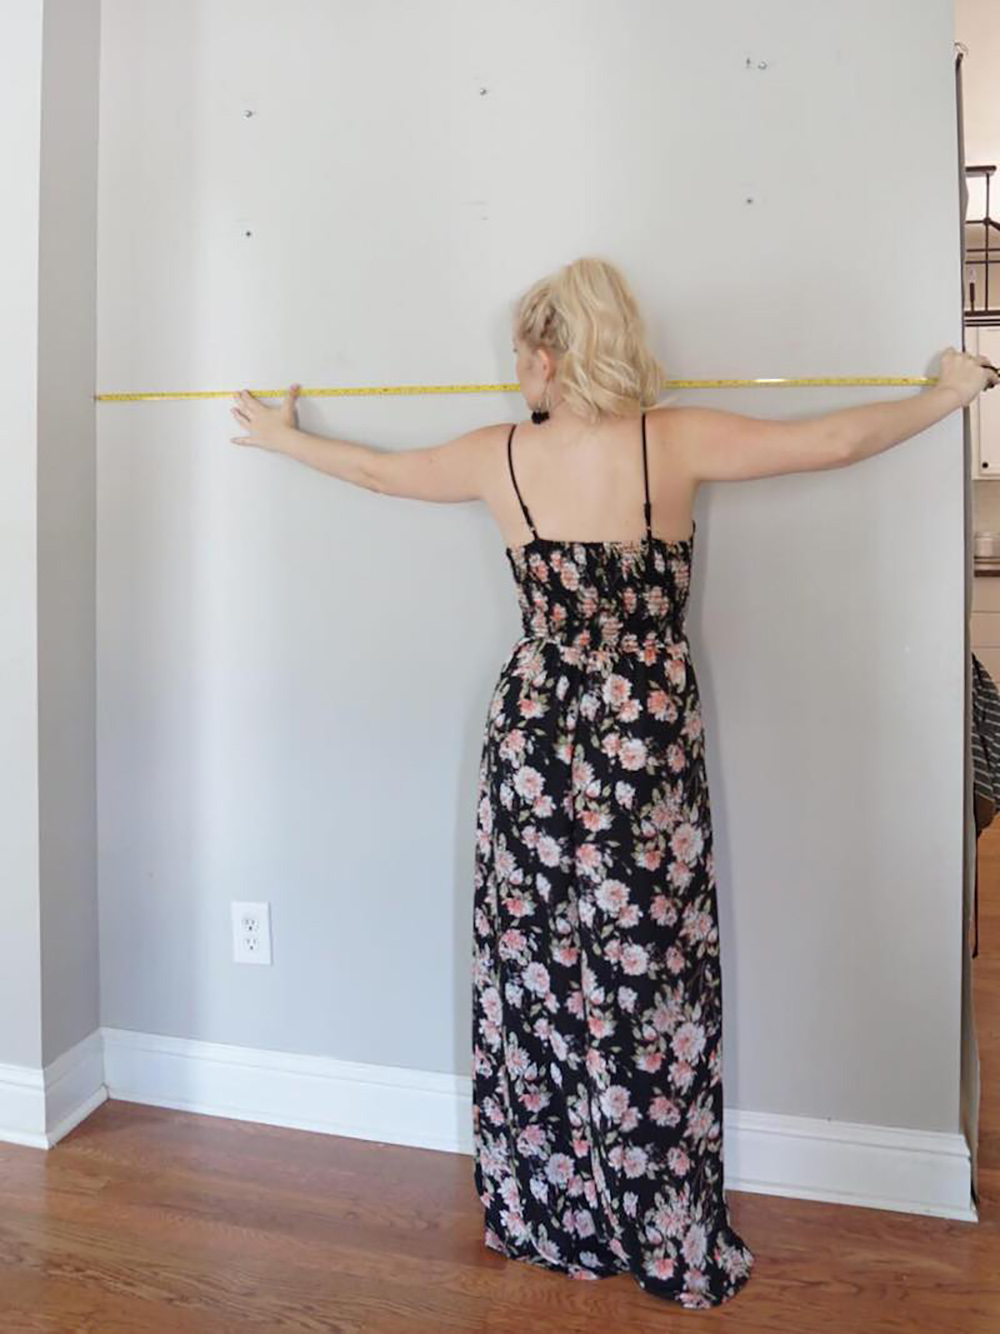 A woman measures a wall with a tape measurer.